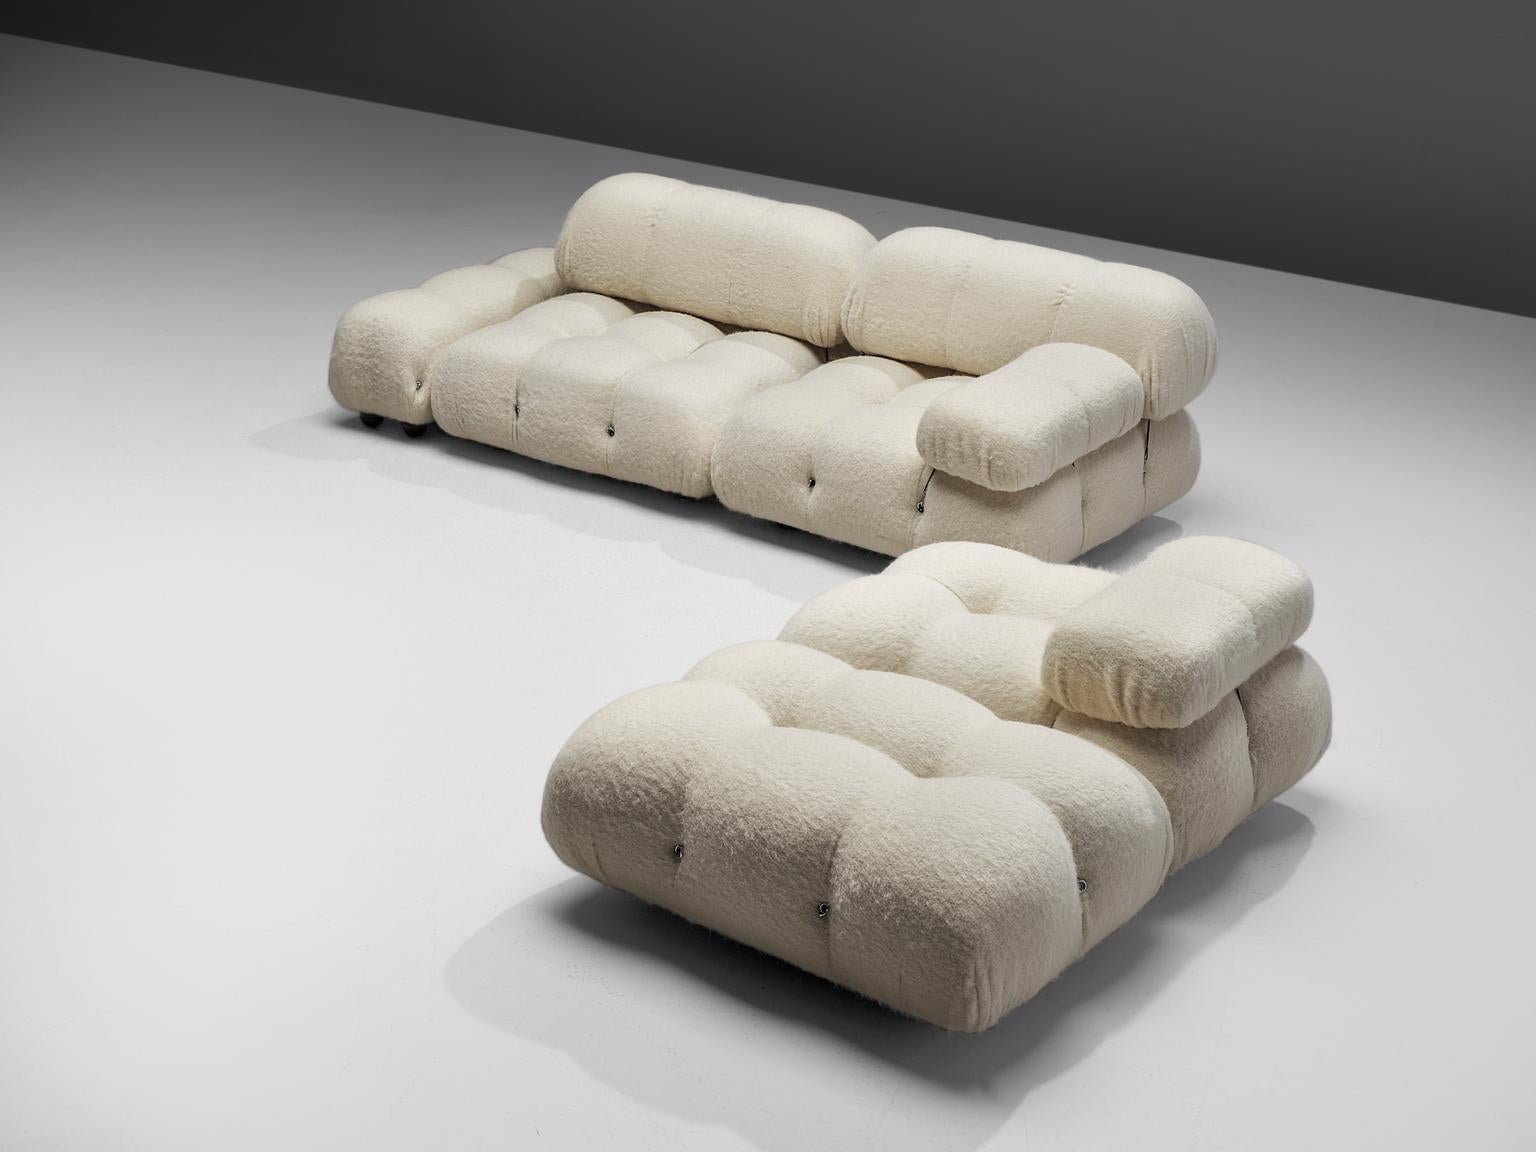 Mario Bellini, large modular 'Cameleonda' sofa, off white woolen upholstery by Pierre Frey, Italy, 1971, reupholstered by our in-house upholstery atelier. 

The sectional elements this sofa was made with can be used freely and apart from one